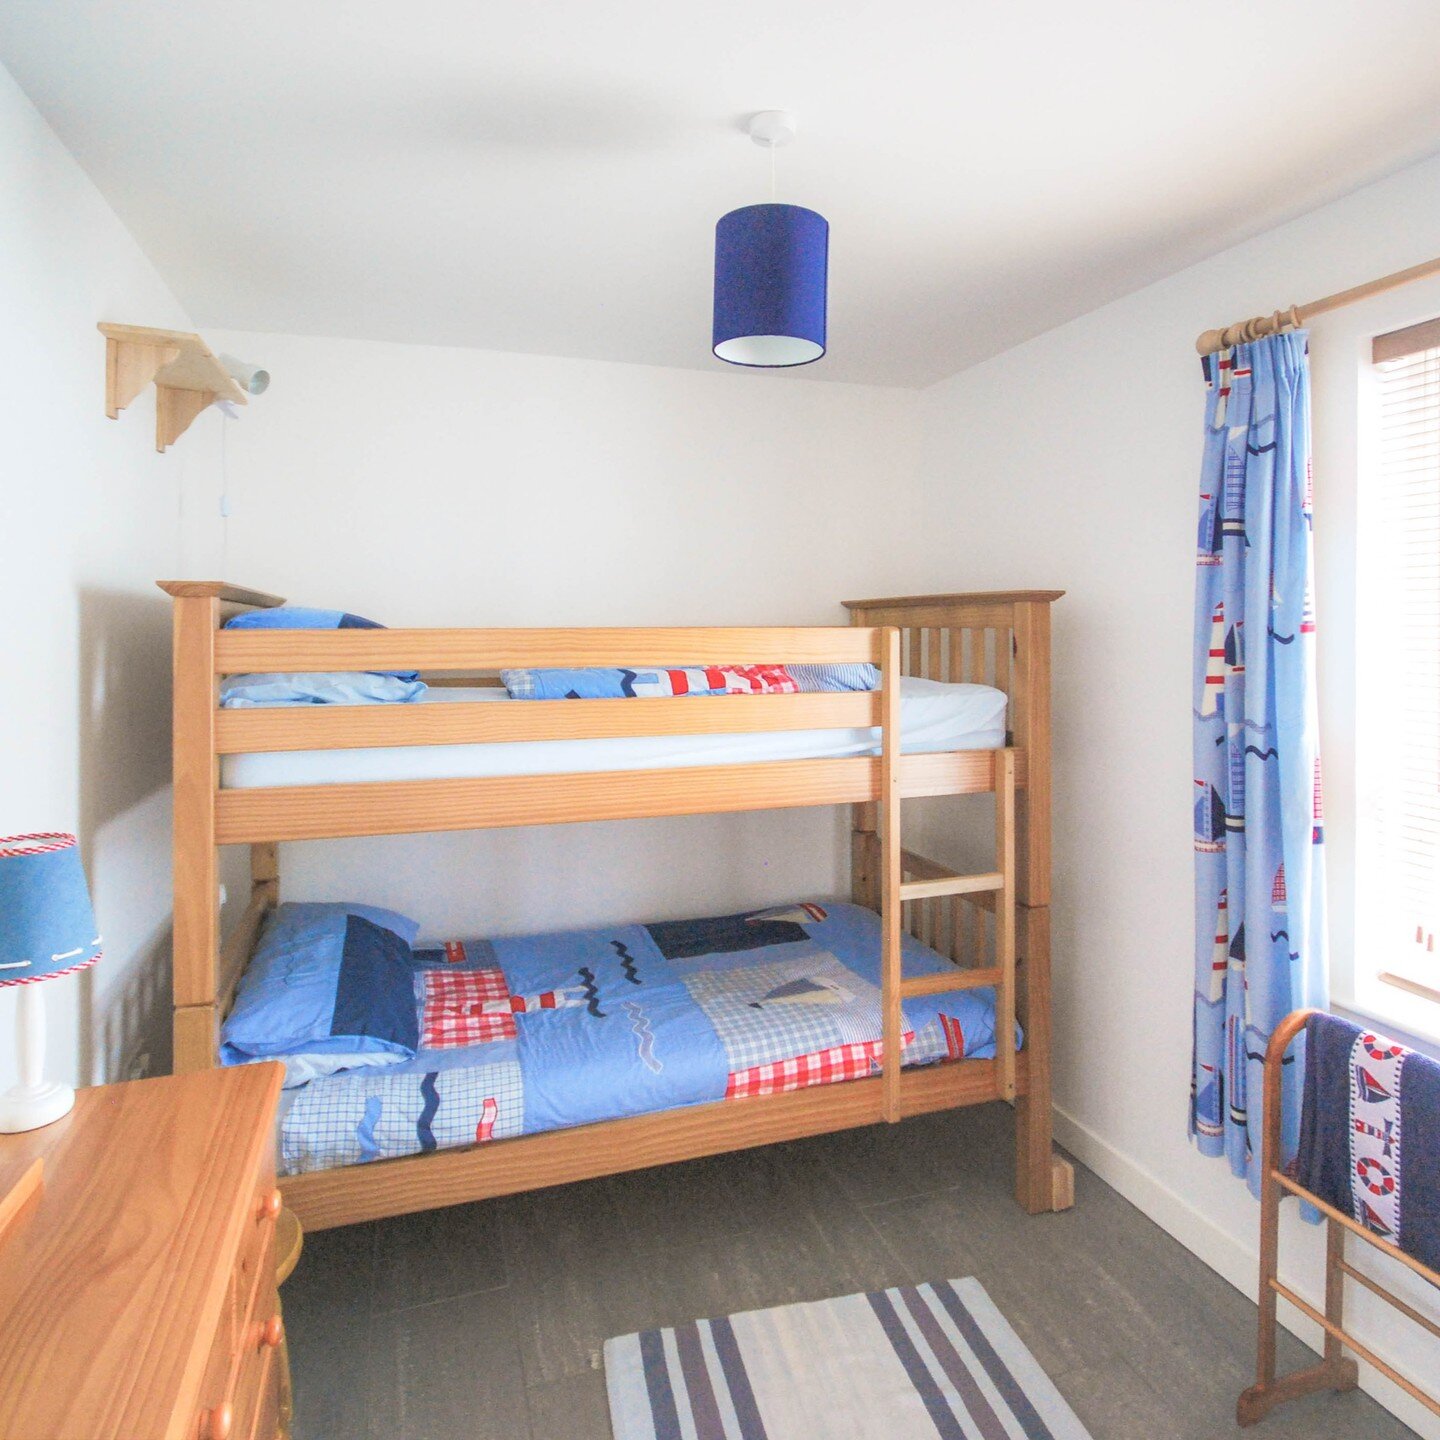 Check out our cozy little cottage by the Causeway Coast! The perfect getaway spot for a family vacation. With stunning views and plenty of activities nearby, you'll never get bored. The kids will love the bunk beds, and you'll love the peace and quie